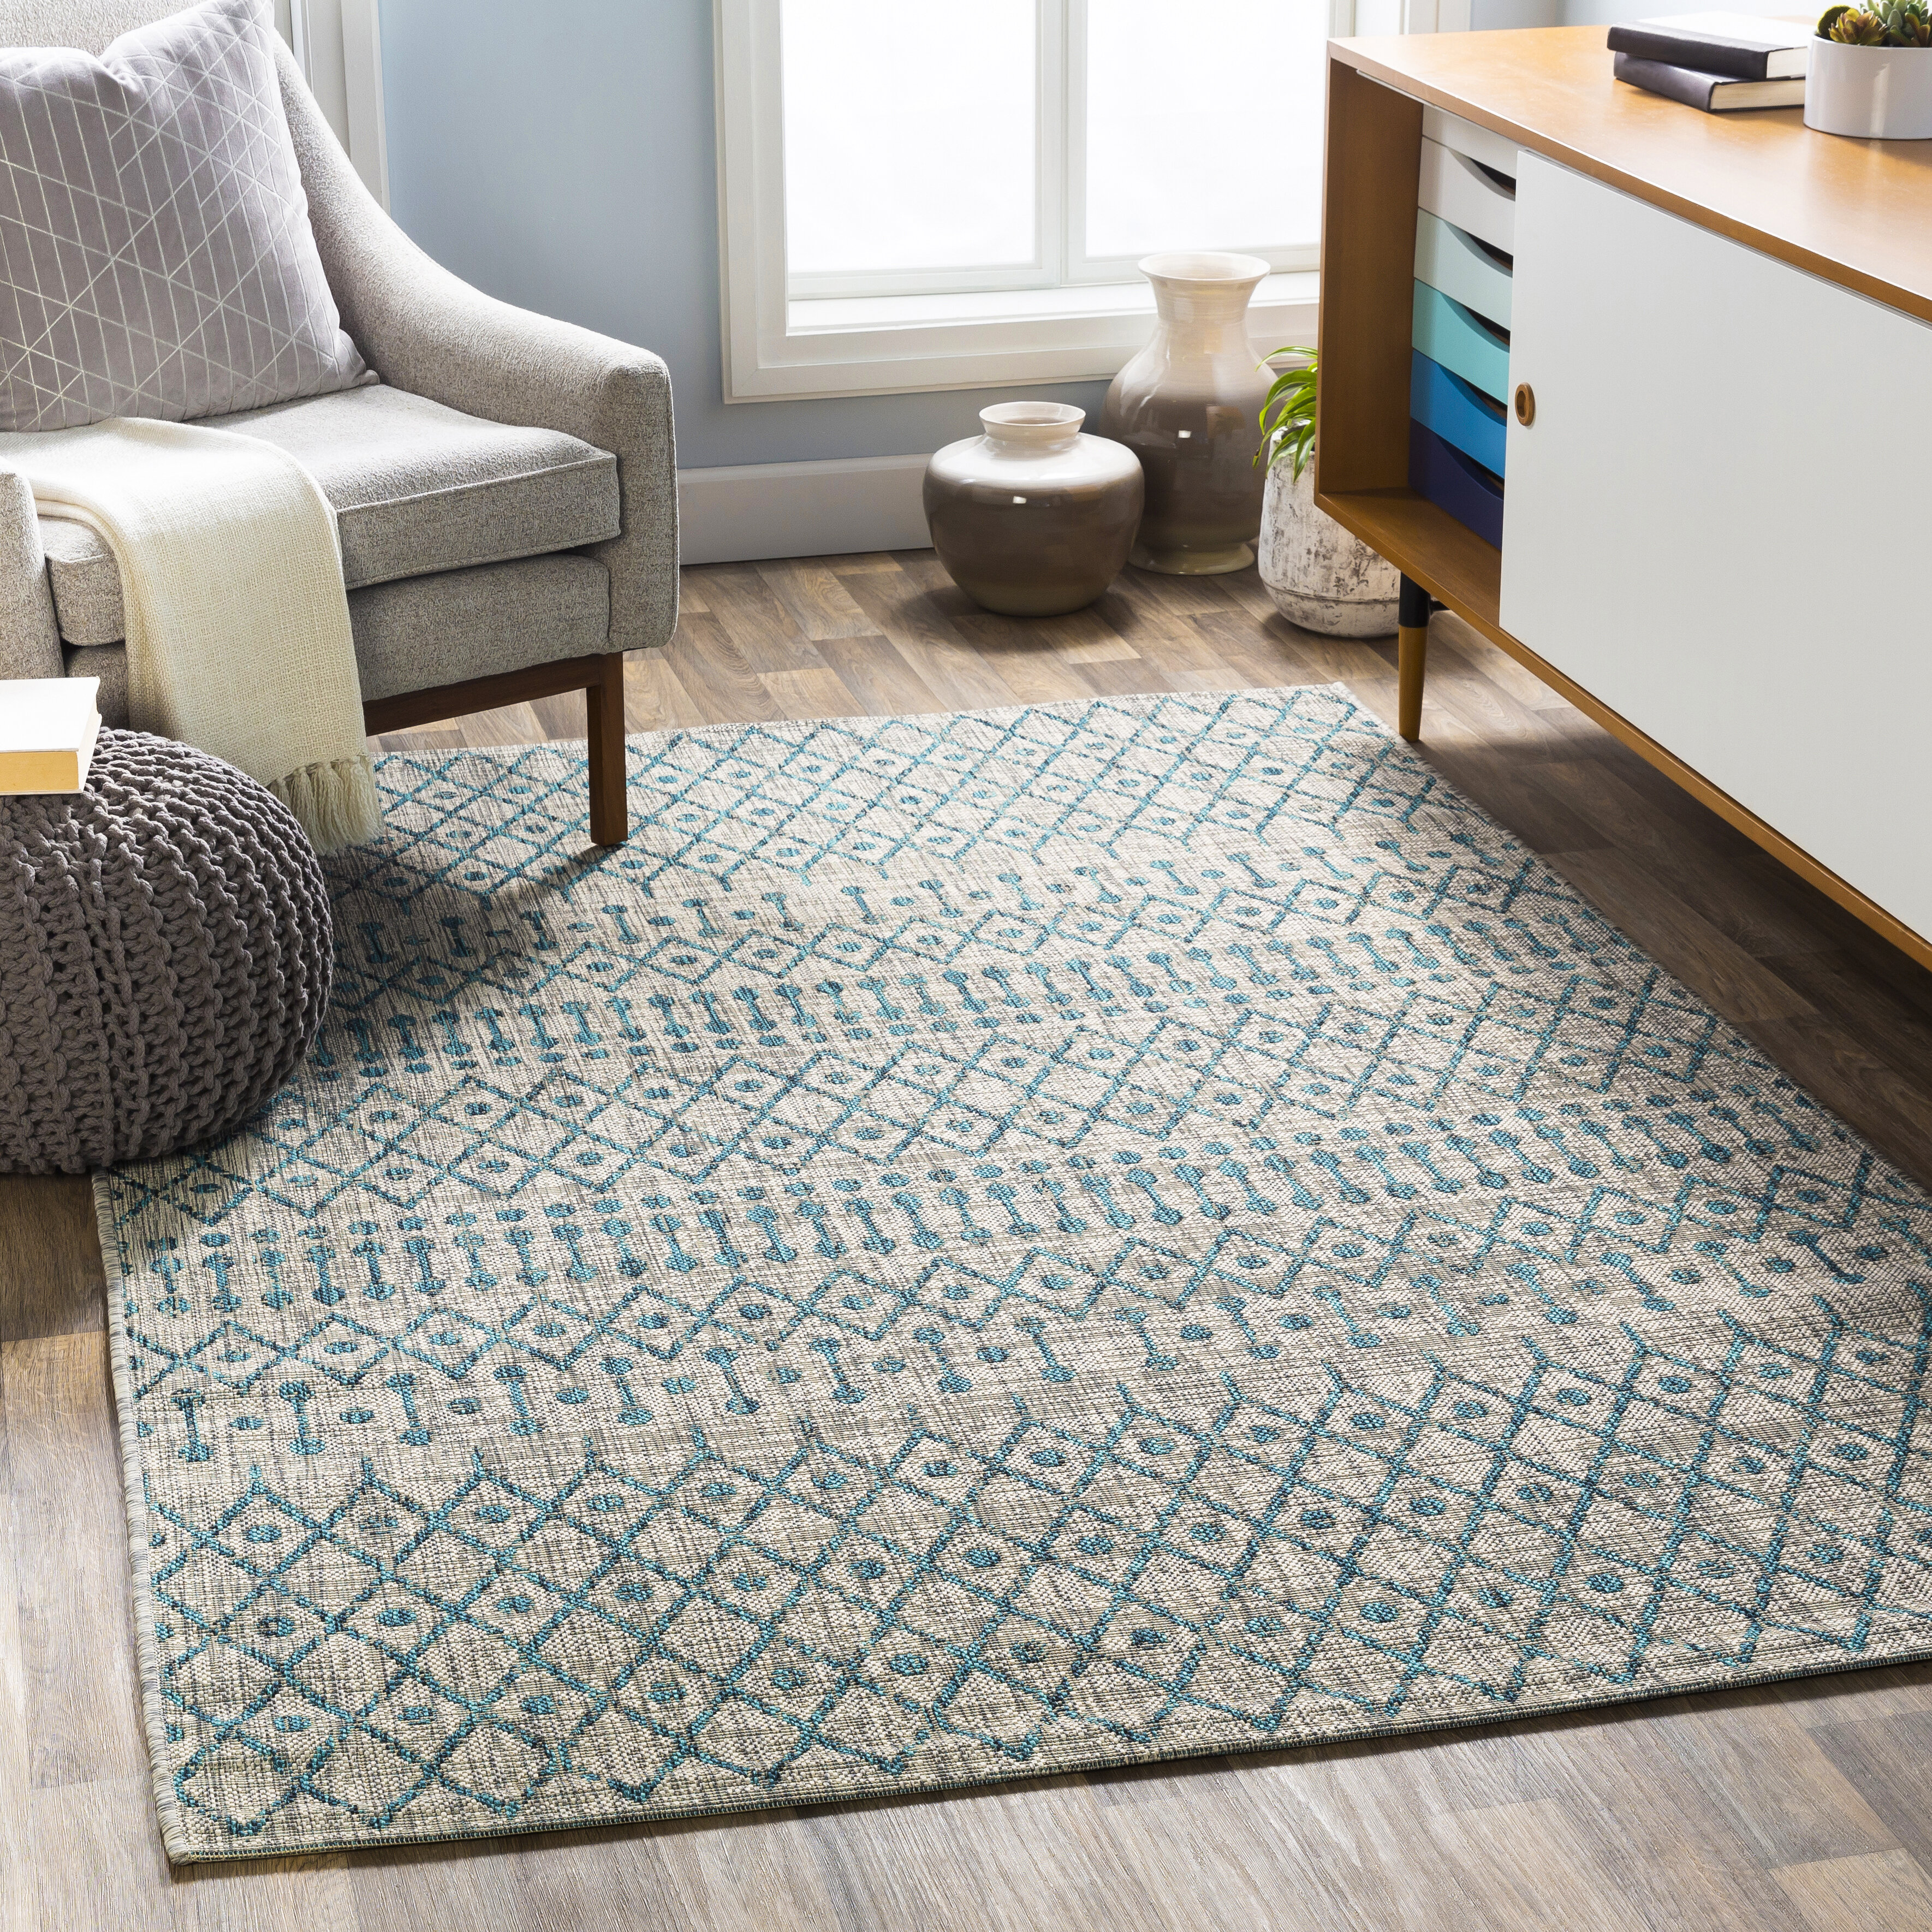 Area Rugs Geometric design Carpet Made in Turkey Color and Size Options 